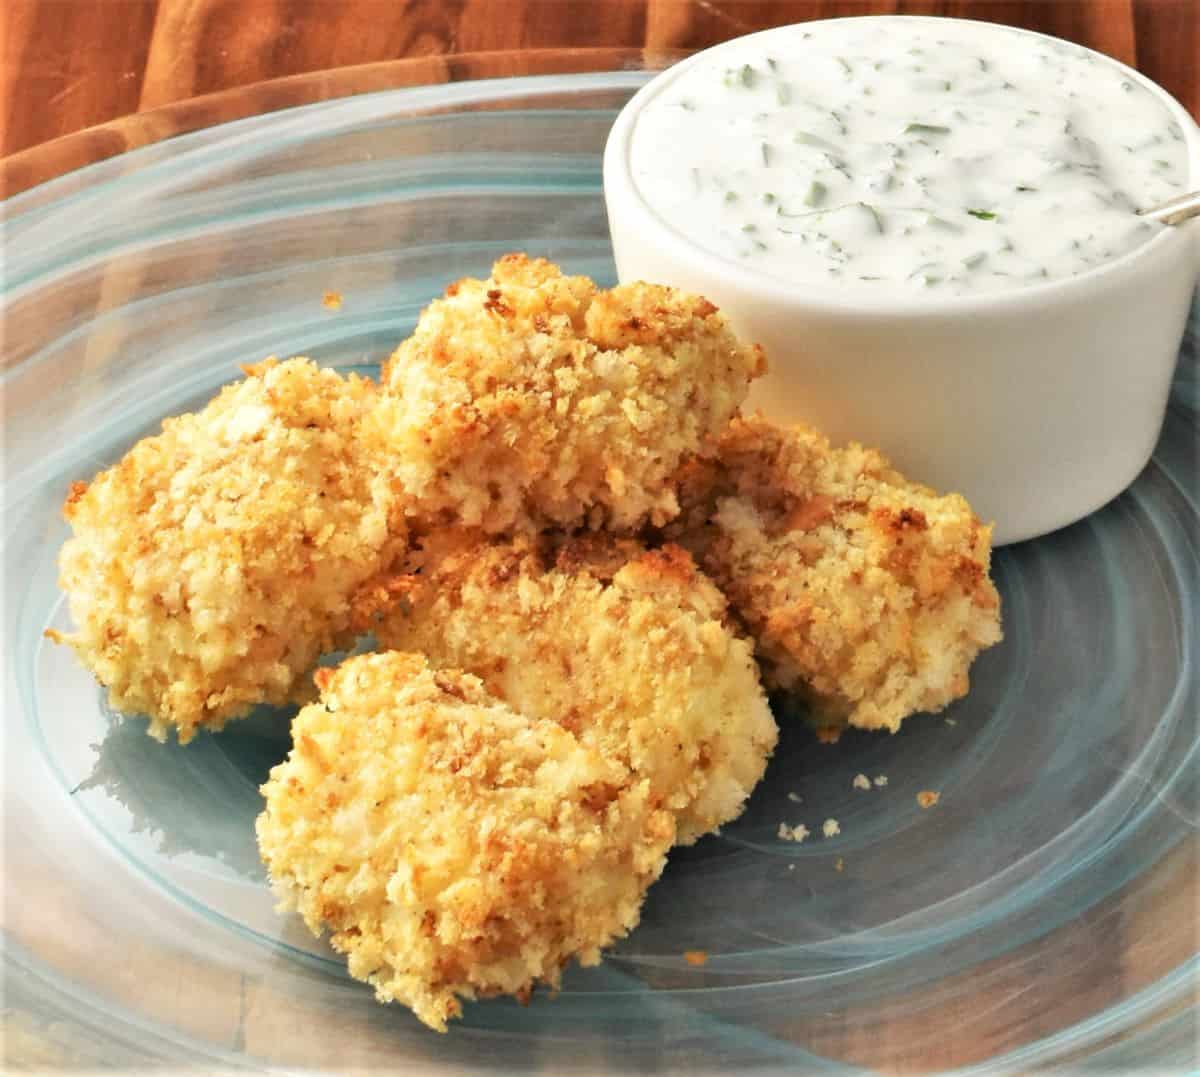 Crispy baked fish nuggets on top of plate with yogurt dip.